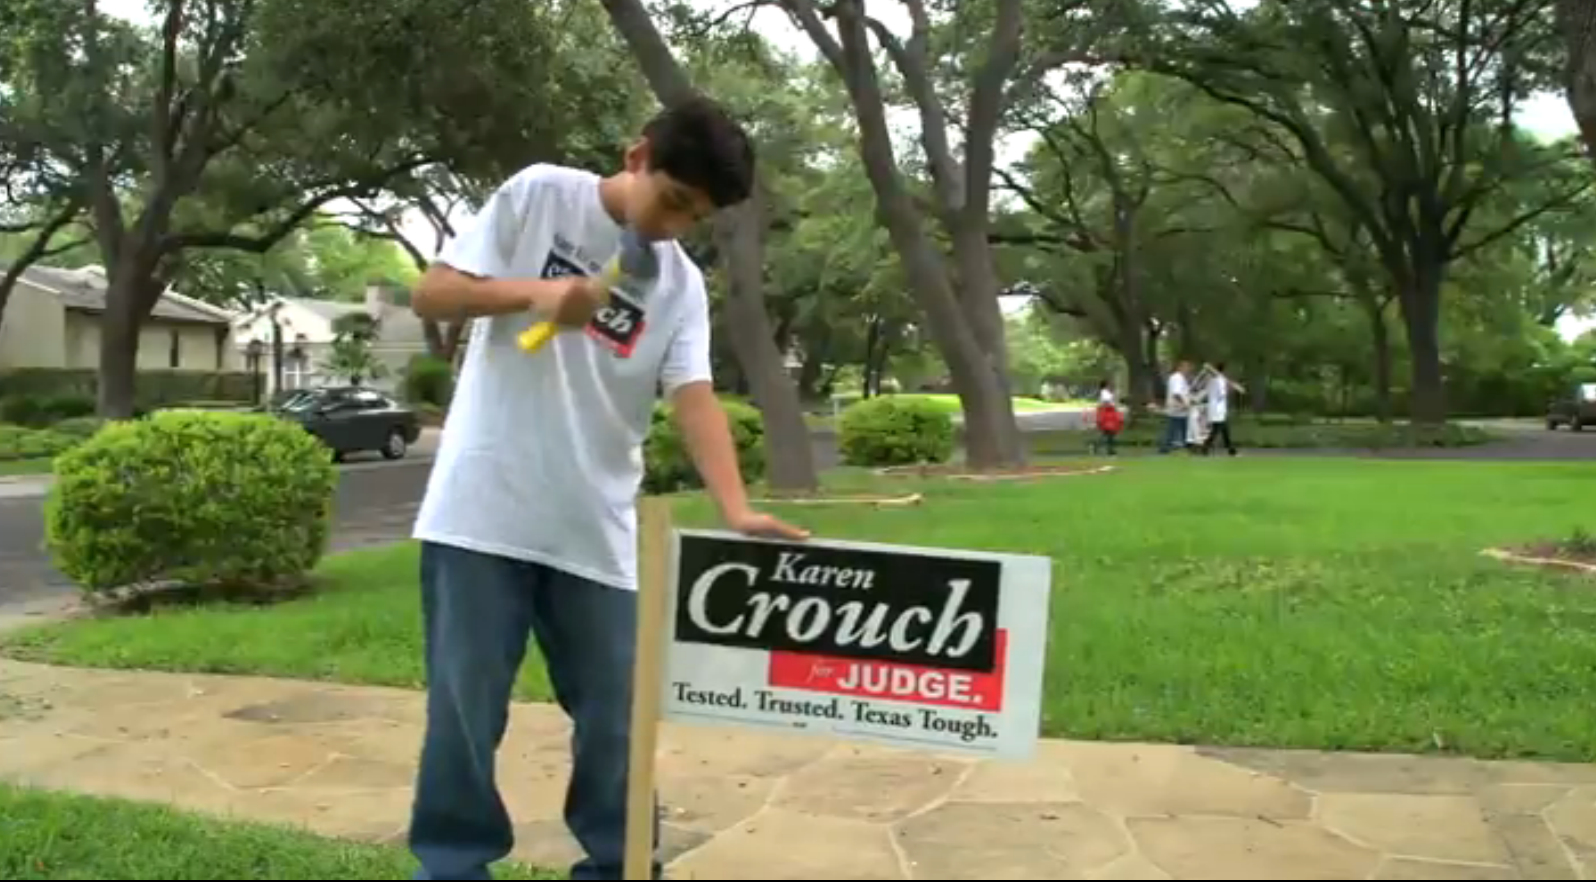 Son Nicholas Flores posts a campaign sign while his brother, sister and father blockwalk the neighborhood.